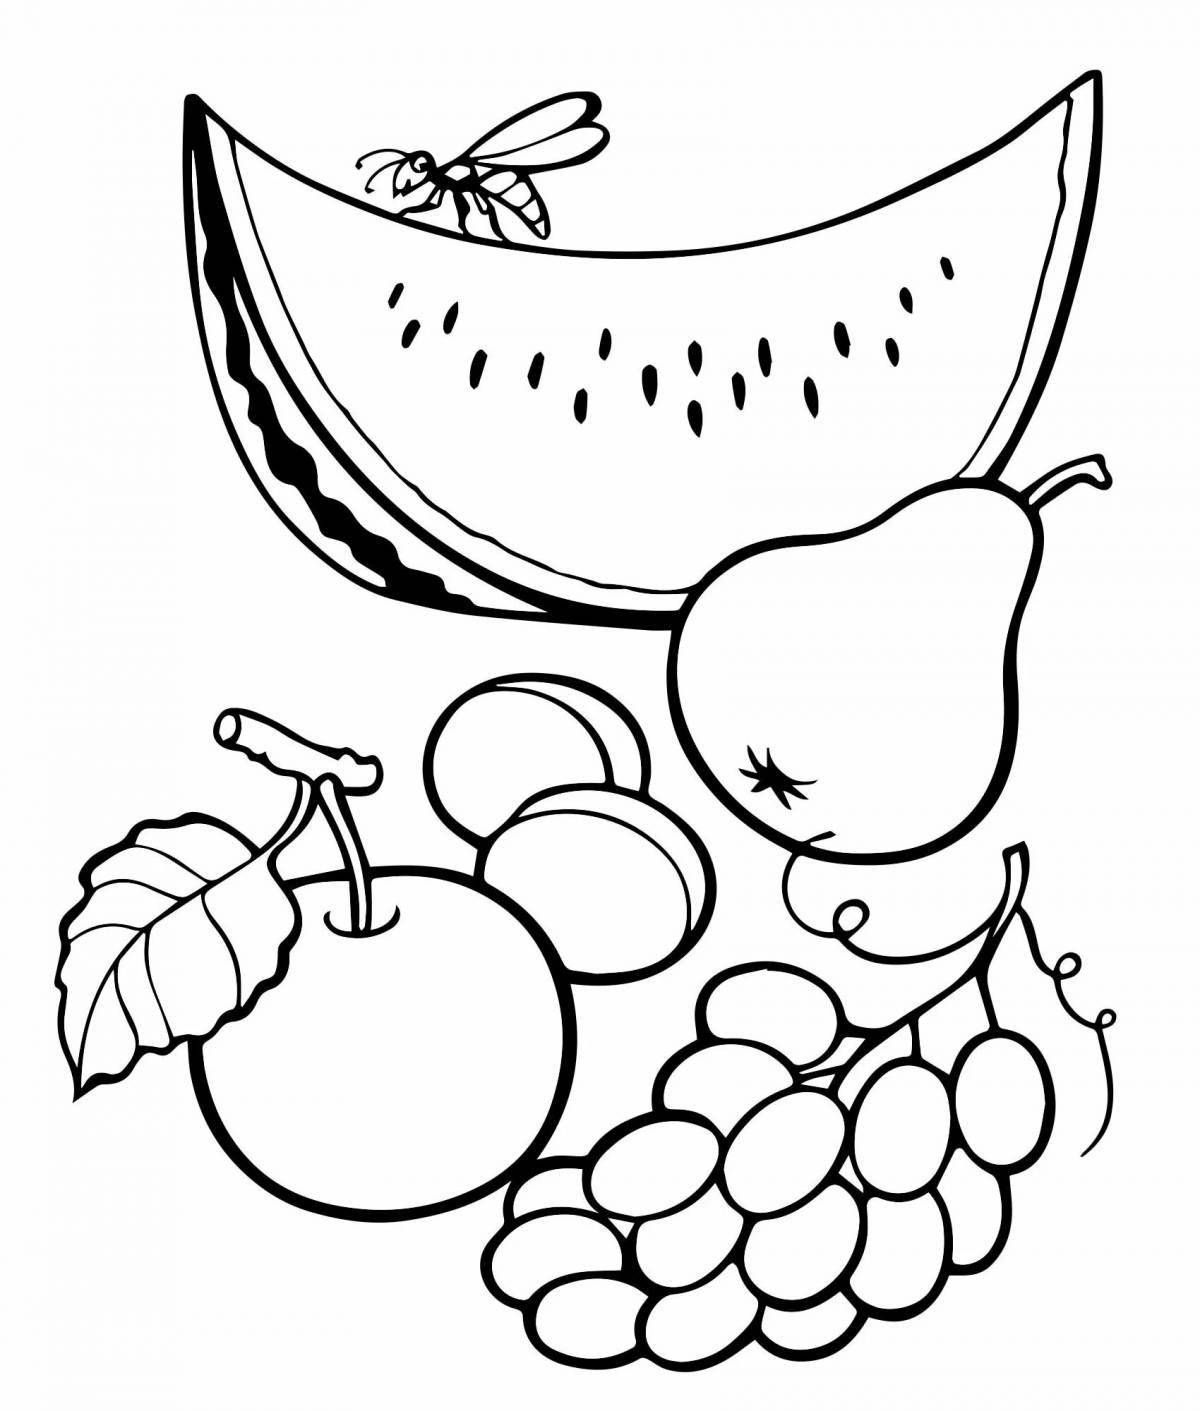 Creative berries and fruits coloring pages for kids